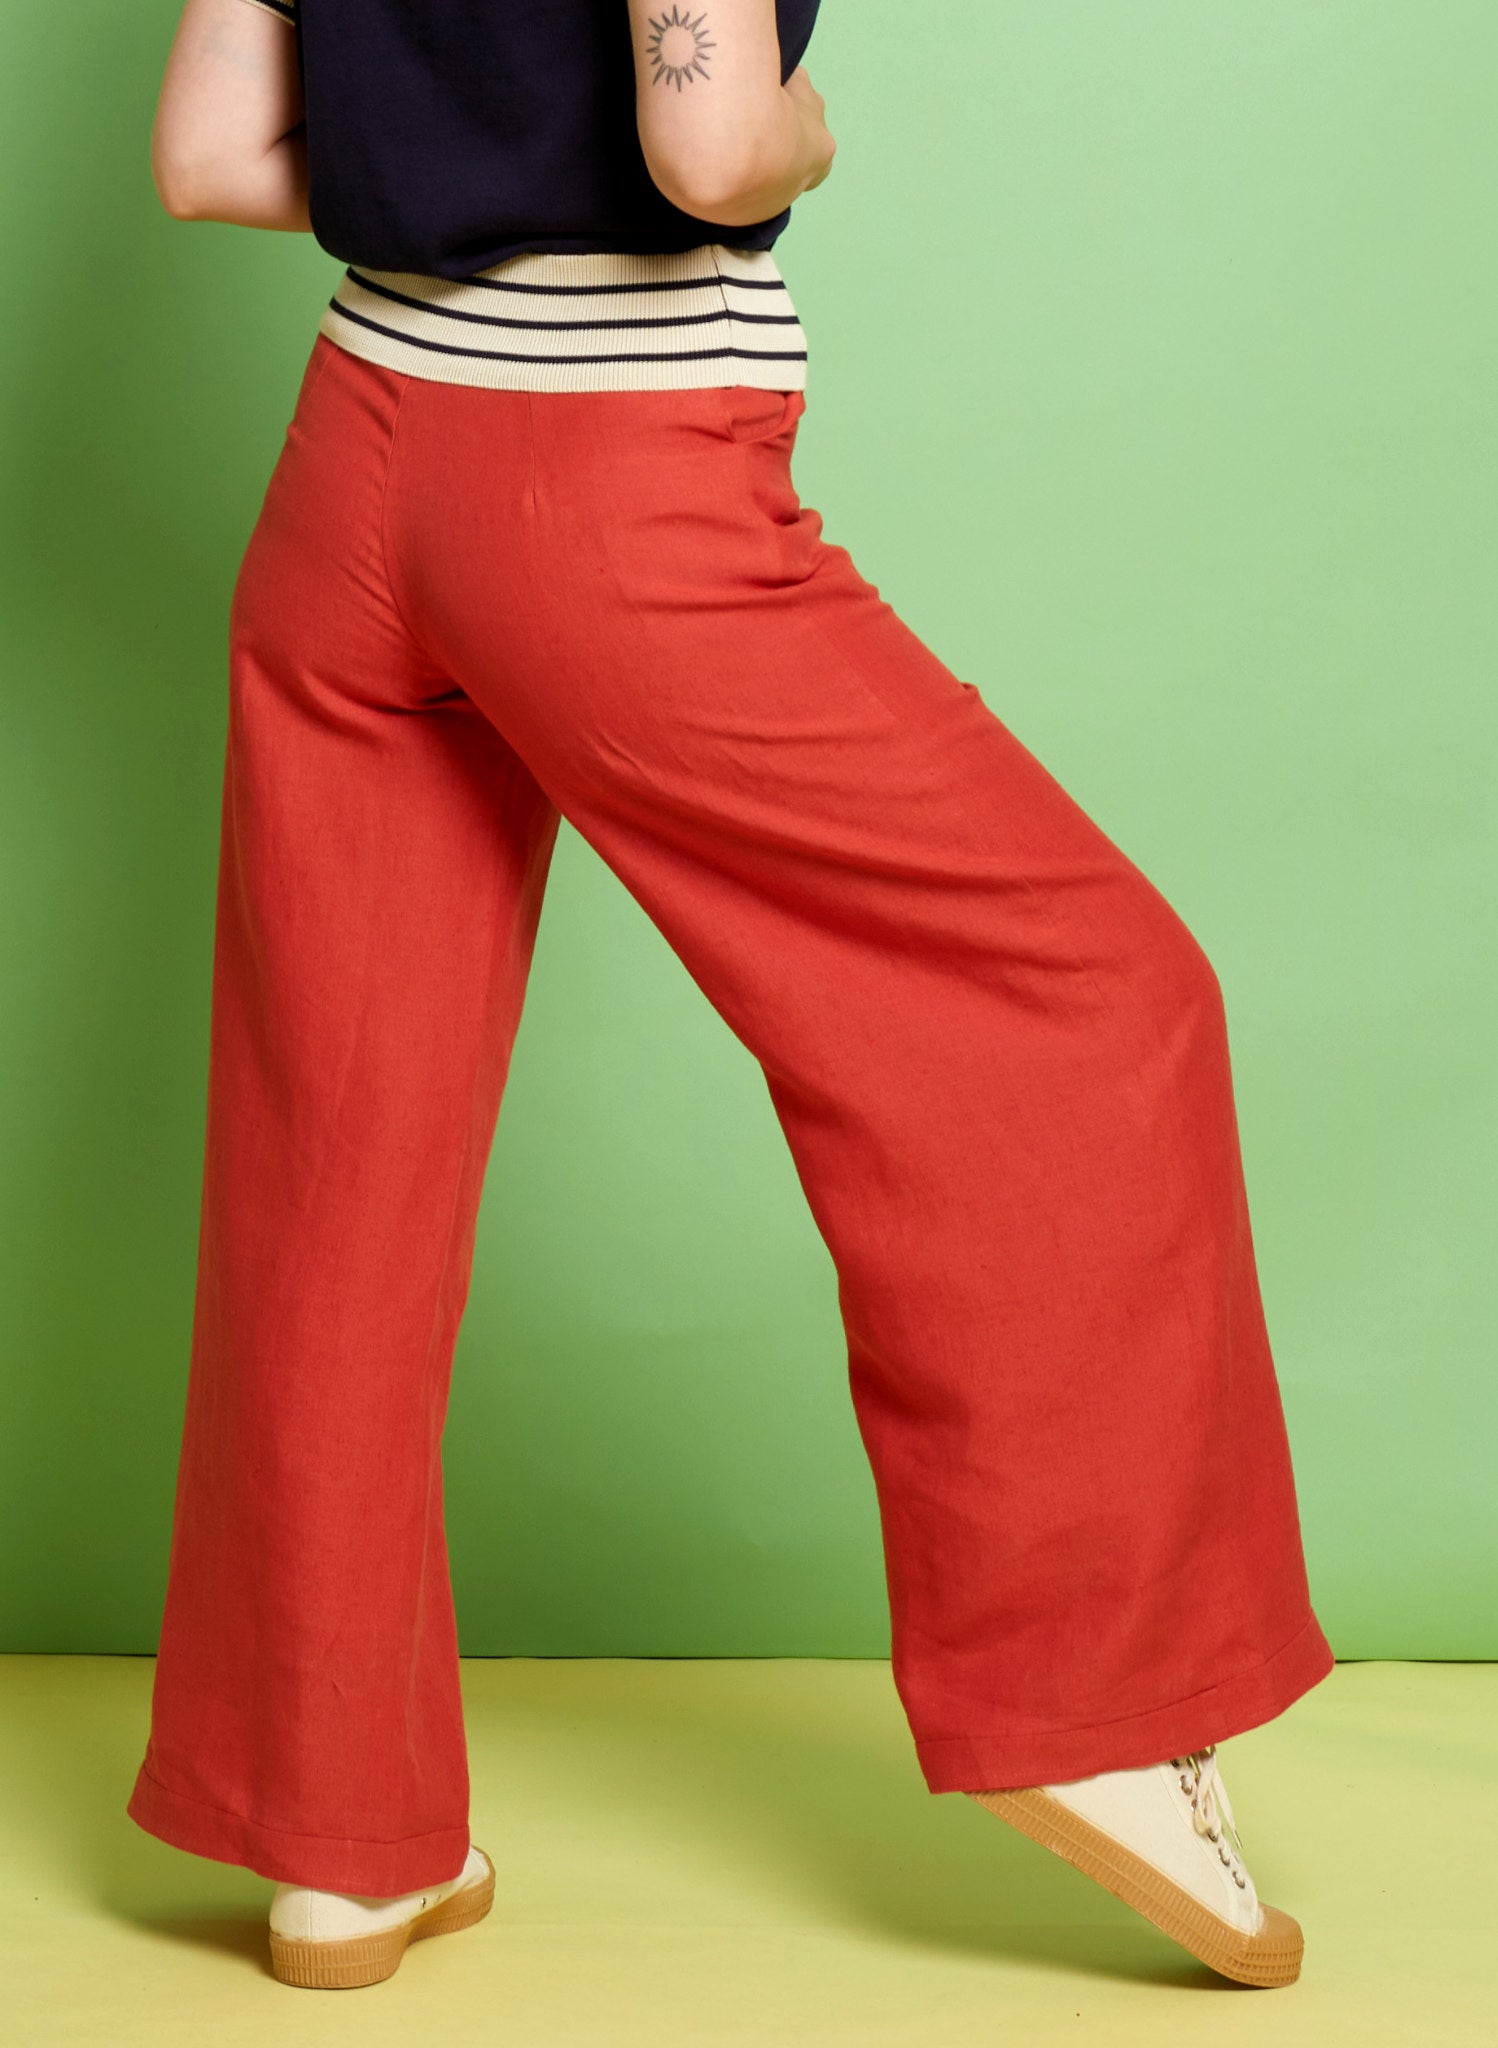 Wide Legged Linen Trousers With Belt and Pockets, High Waisted Pants,  Summer Palazzo Pants, Beach Pants for Women, Striped Pants for Ladies -   Hong Kong